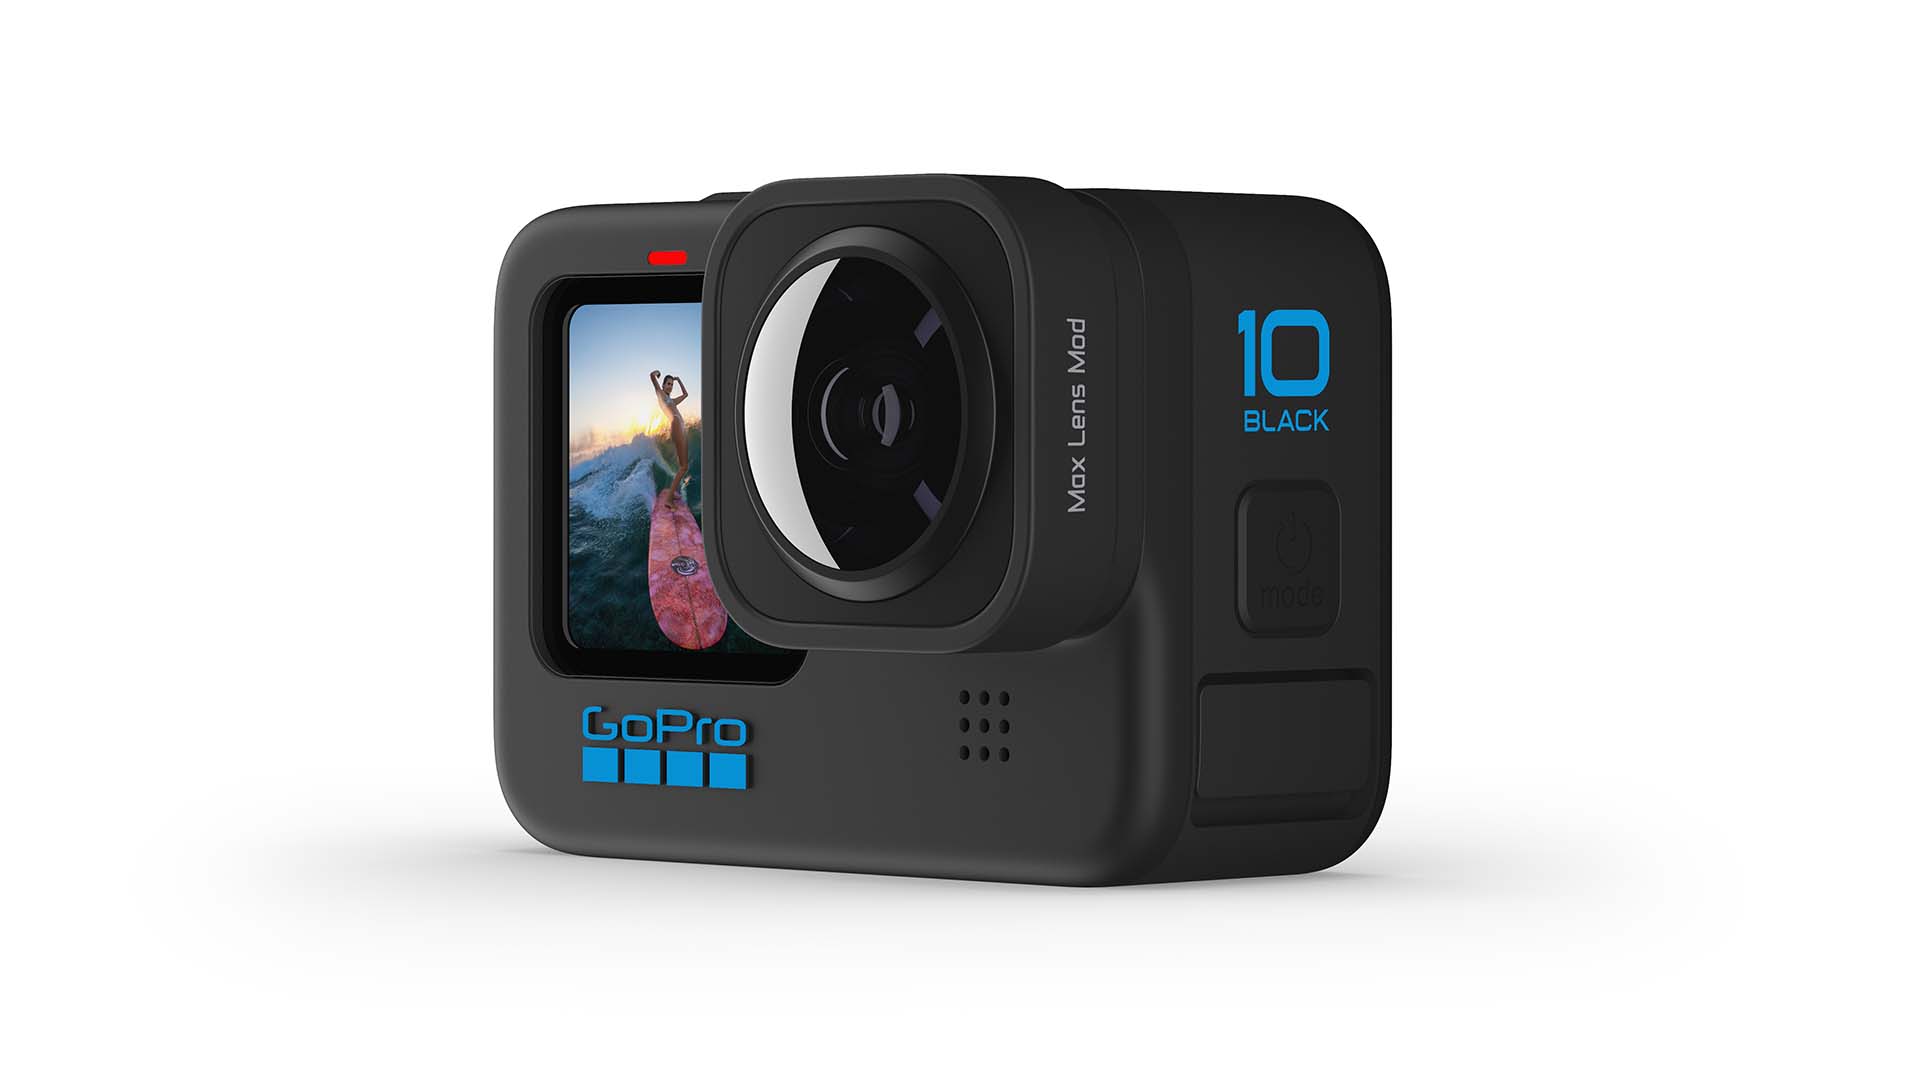 The GoPro HERO10 Black with the Max Lens Mod. Image: GoPro.